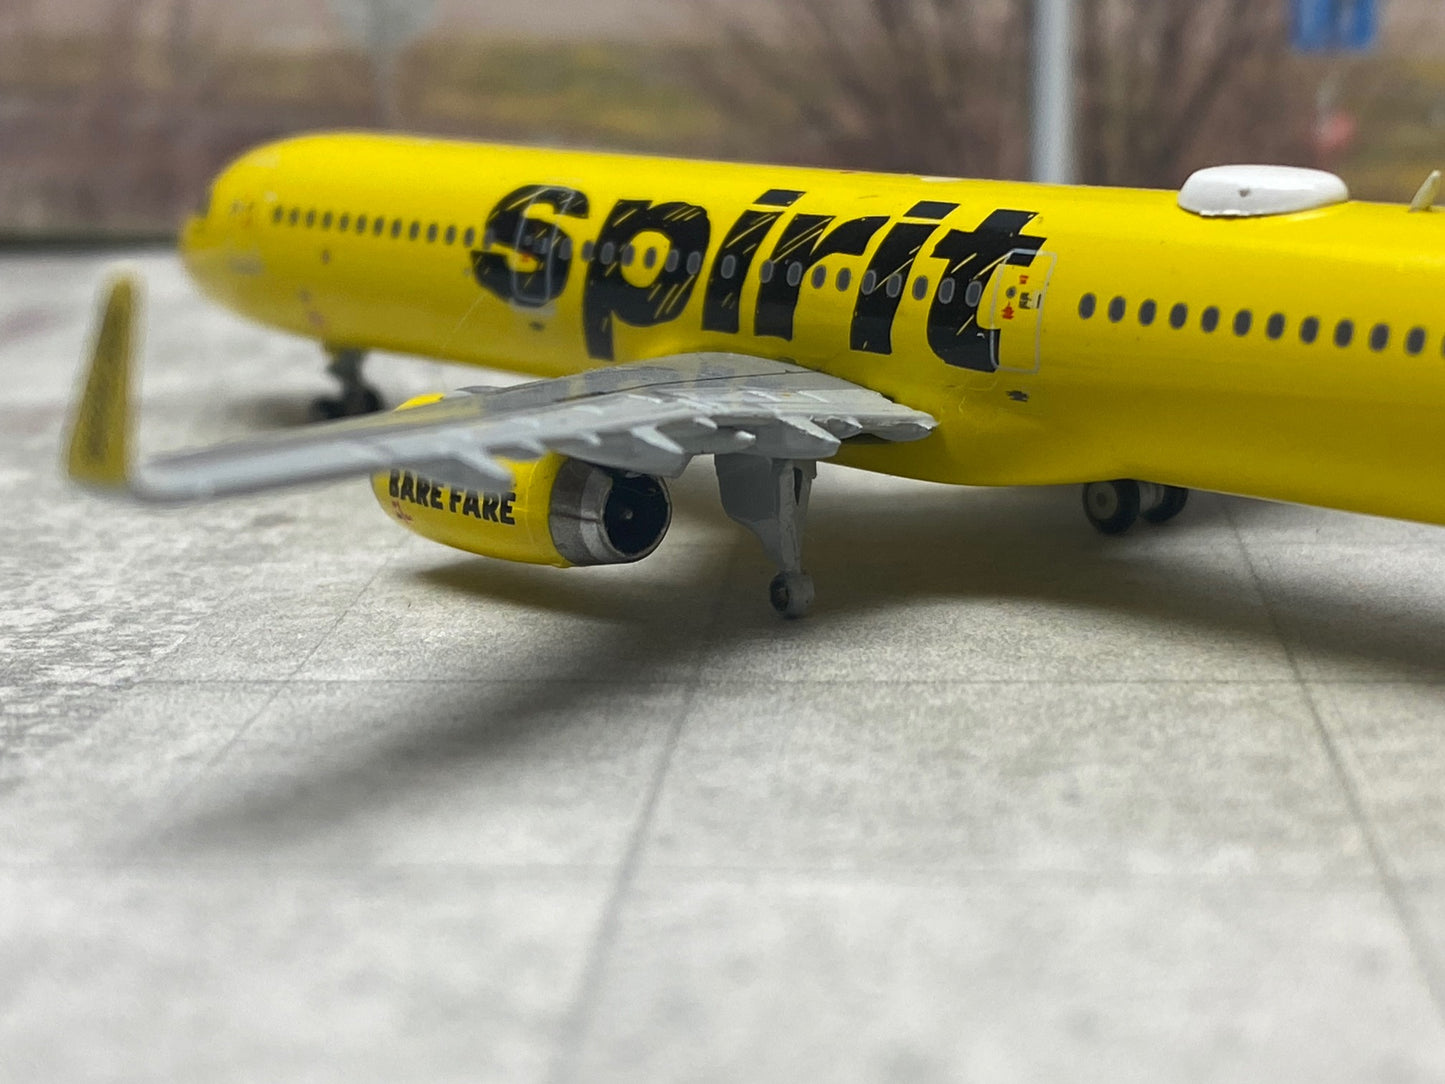 1/400 Spirit Airlines A321 Gemini Jets GJNKS1526 *Missing left main tires and one antenna*